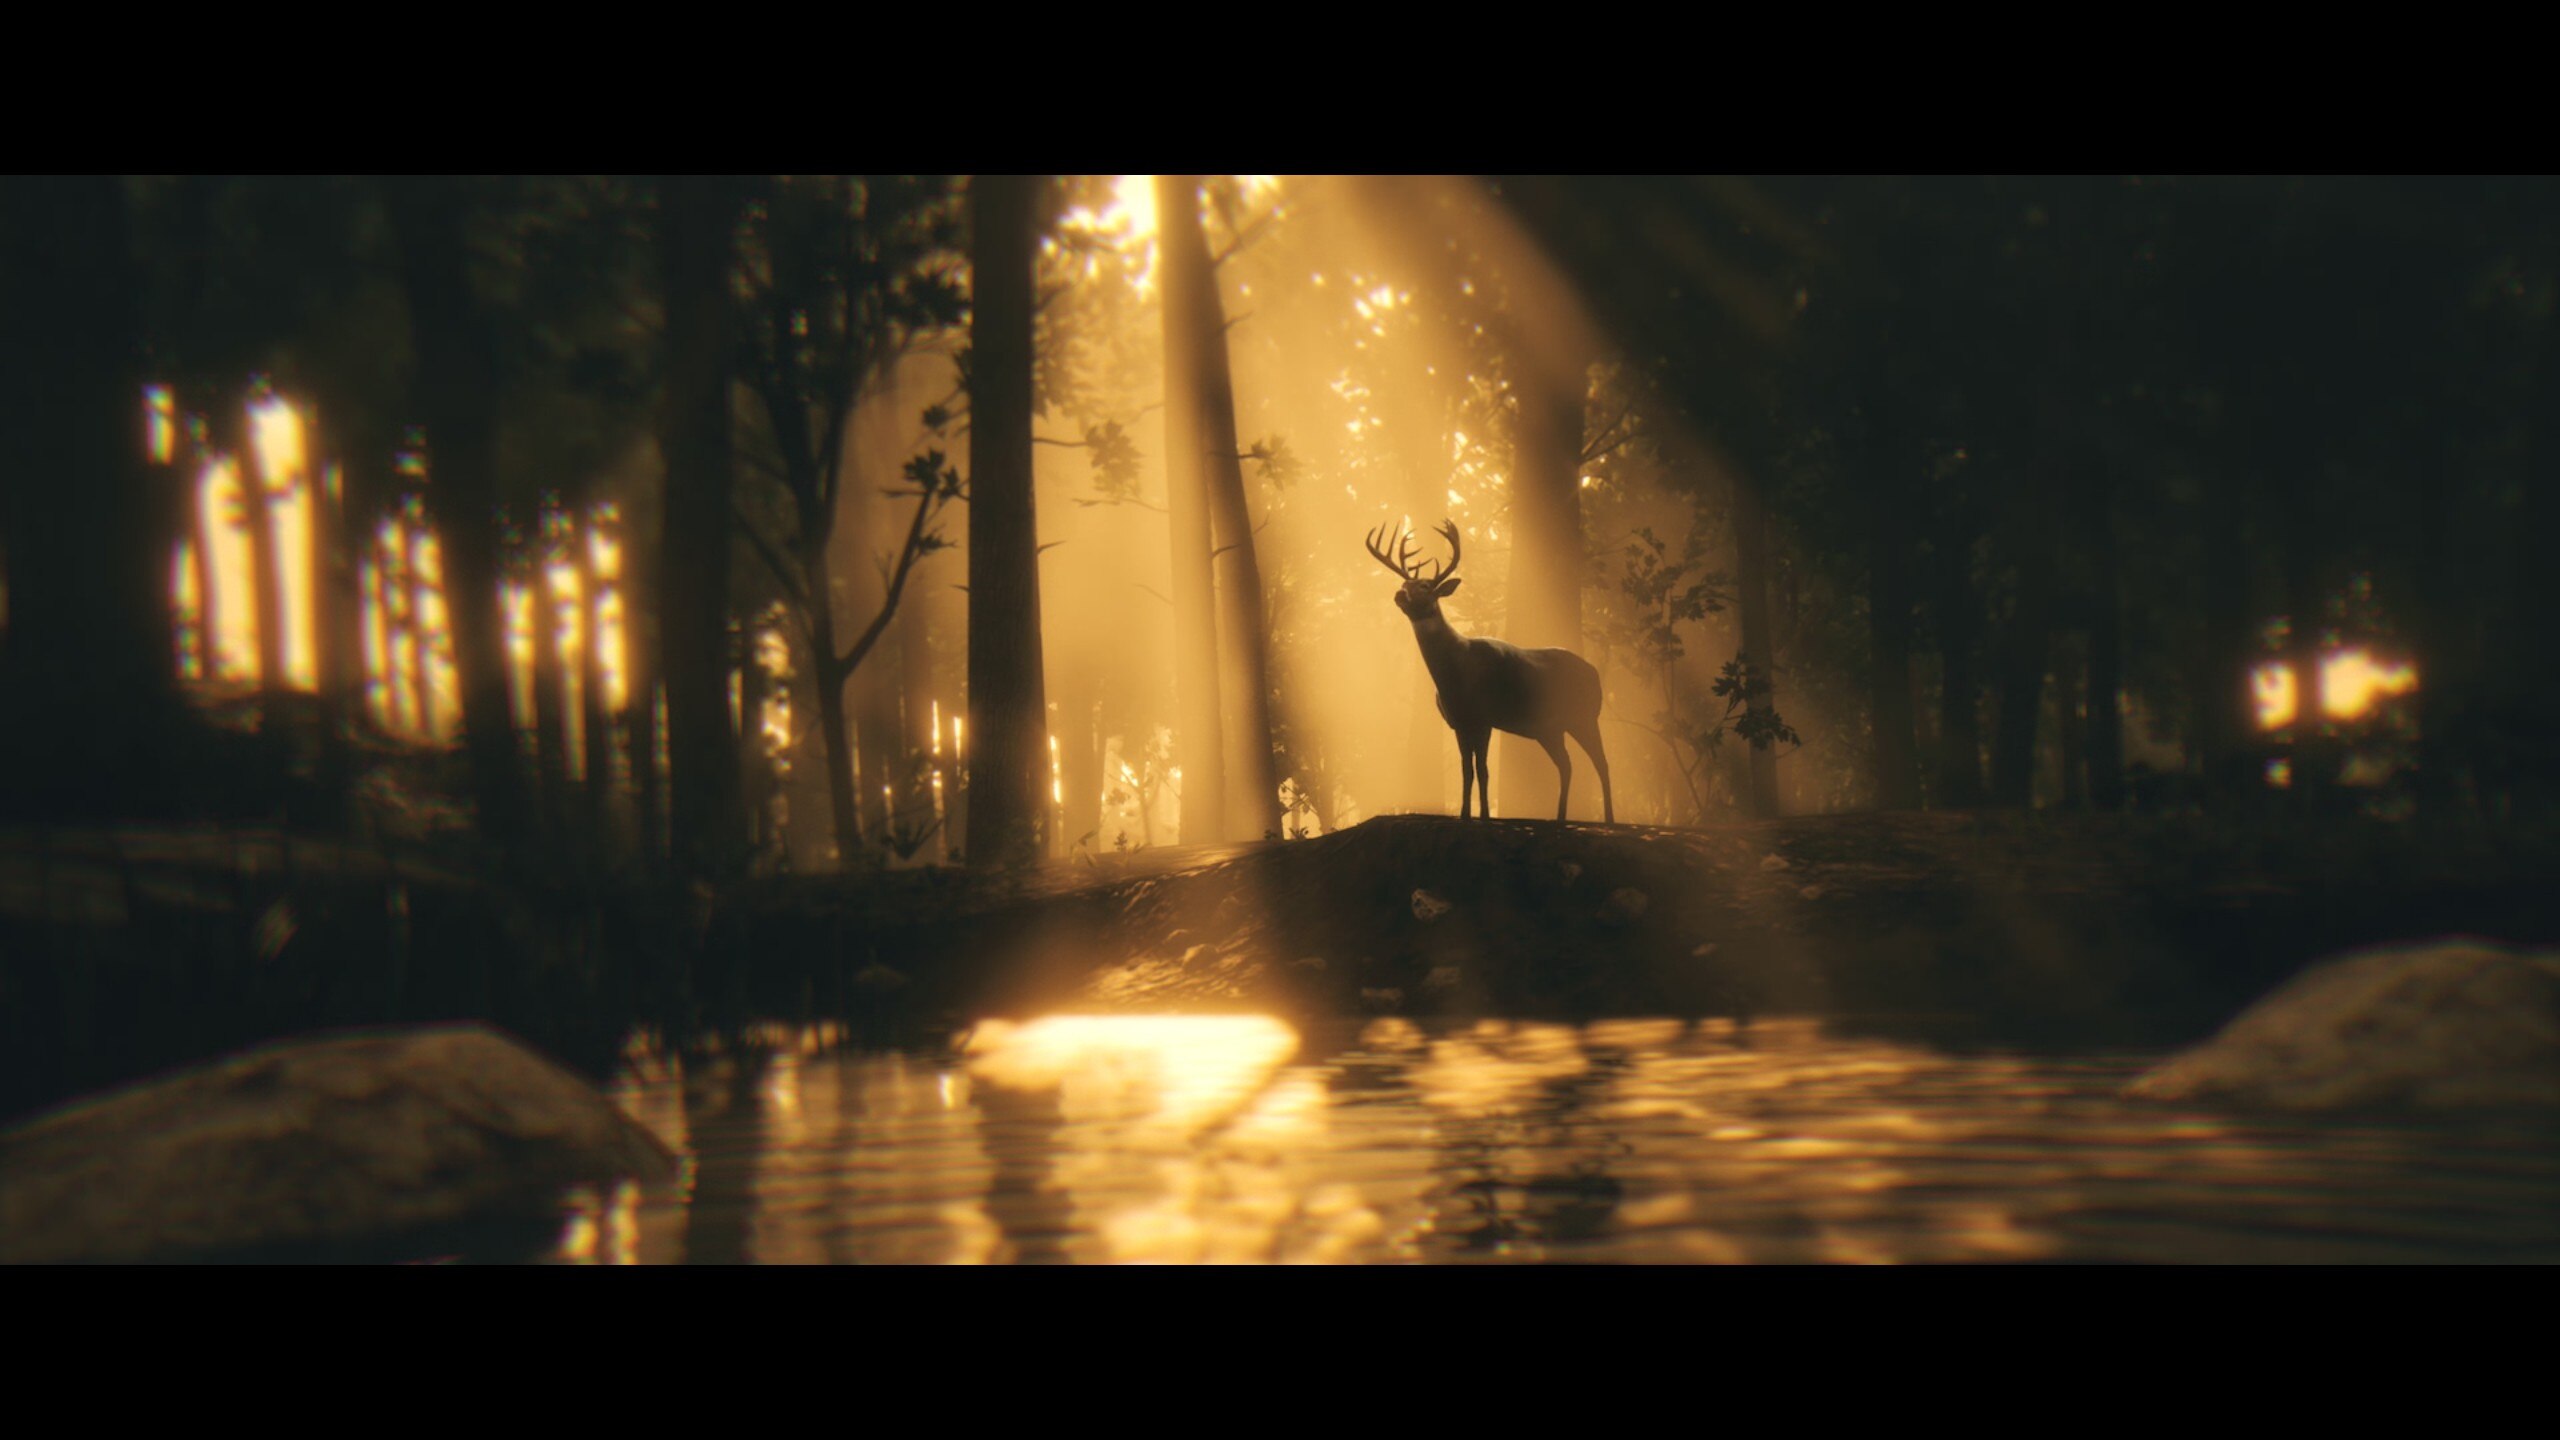 Red Dead Redemption 2 Deer Video Games Animals Nature Trees 2560x1440